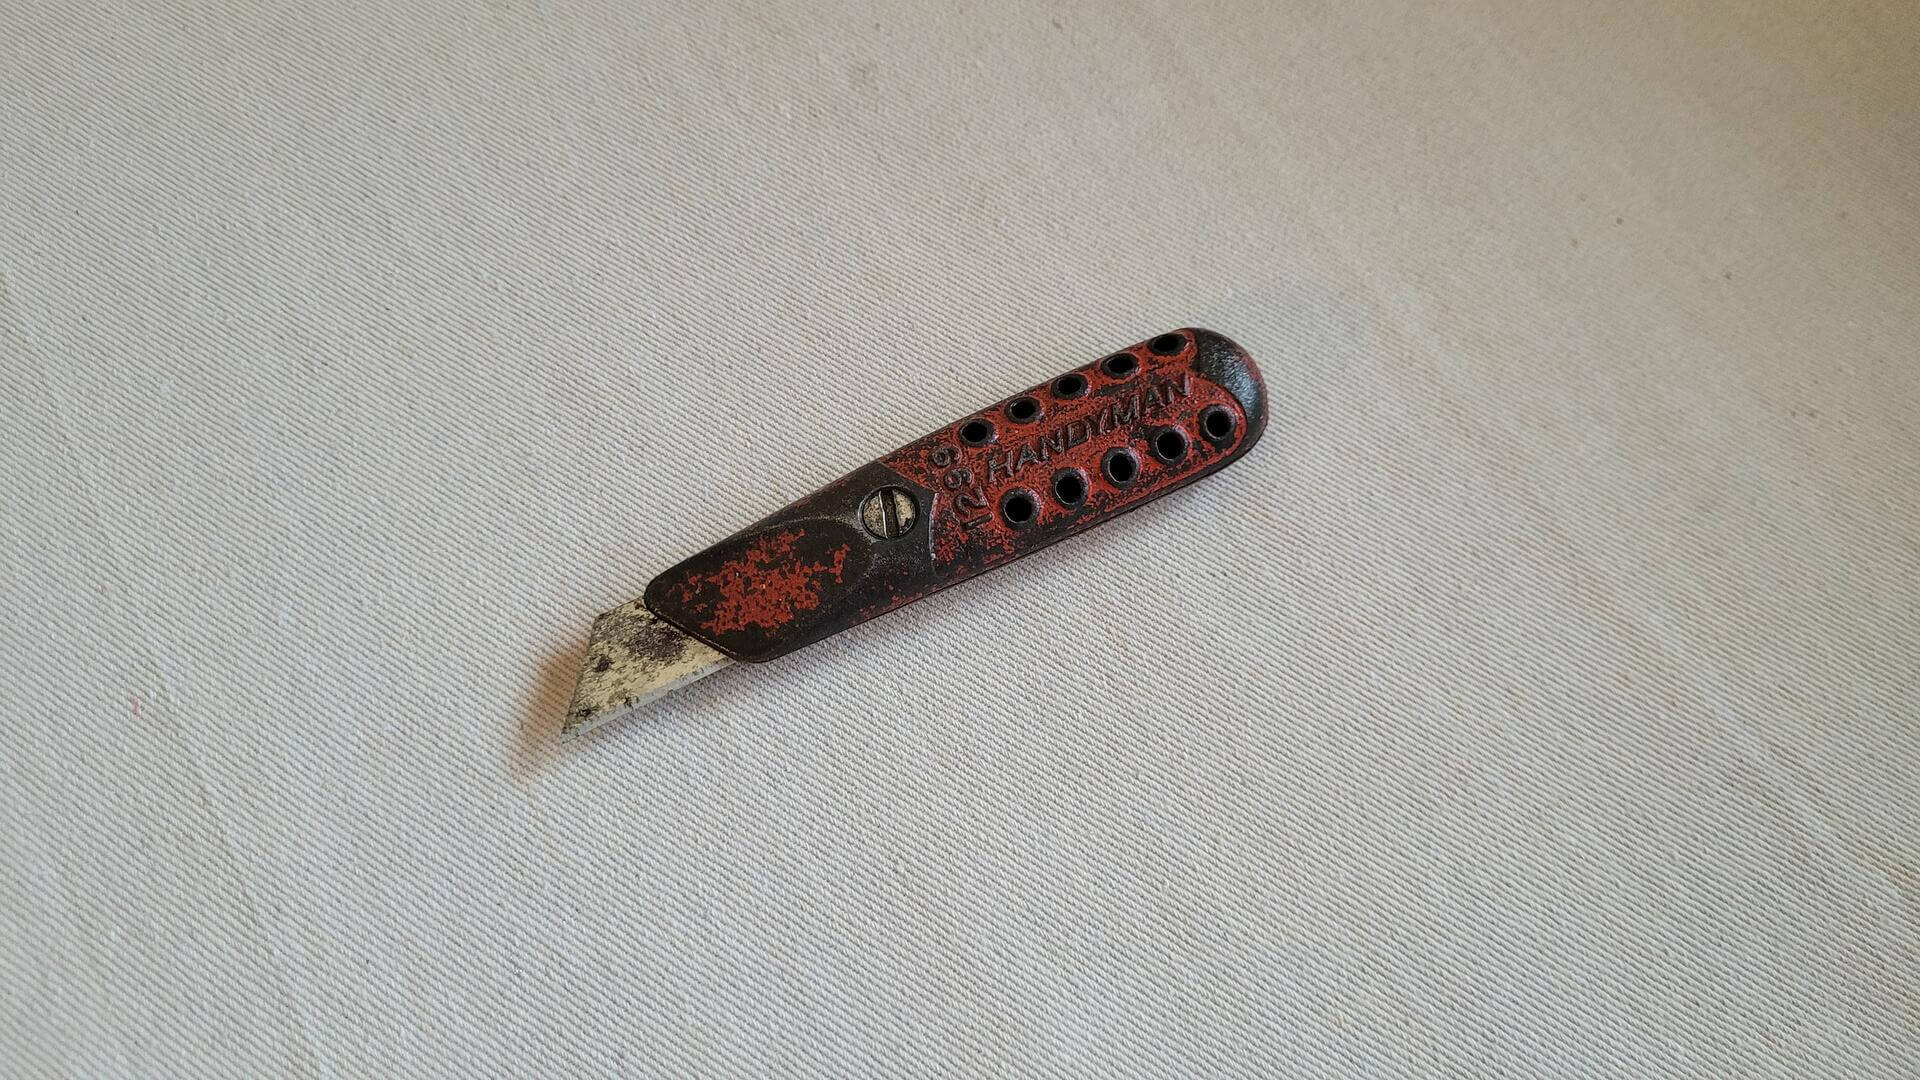 Rare Stanley Handyman No 1299 red metal cast iron fixed blade utility knife and box cutter 4 3/4" long with beautiful ergonomic design. Vintage made in Canada collectible hand tool marketed as Handyman line where in the USA it was branded as Stanley Defiance No 1299